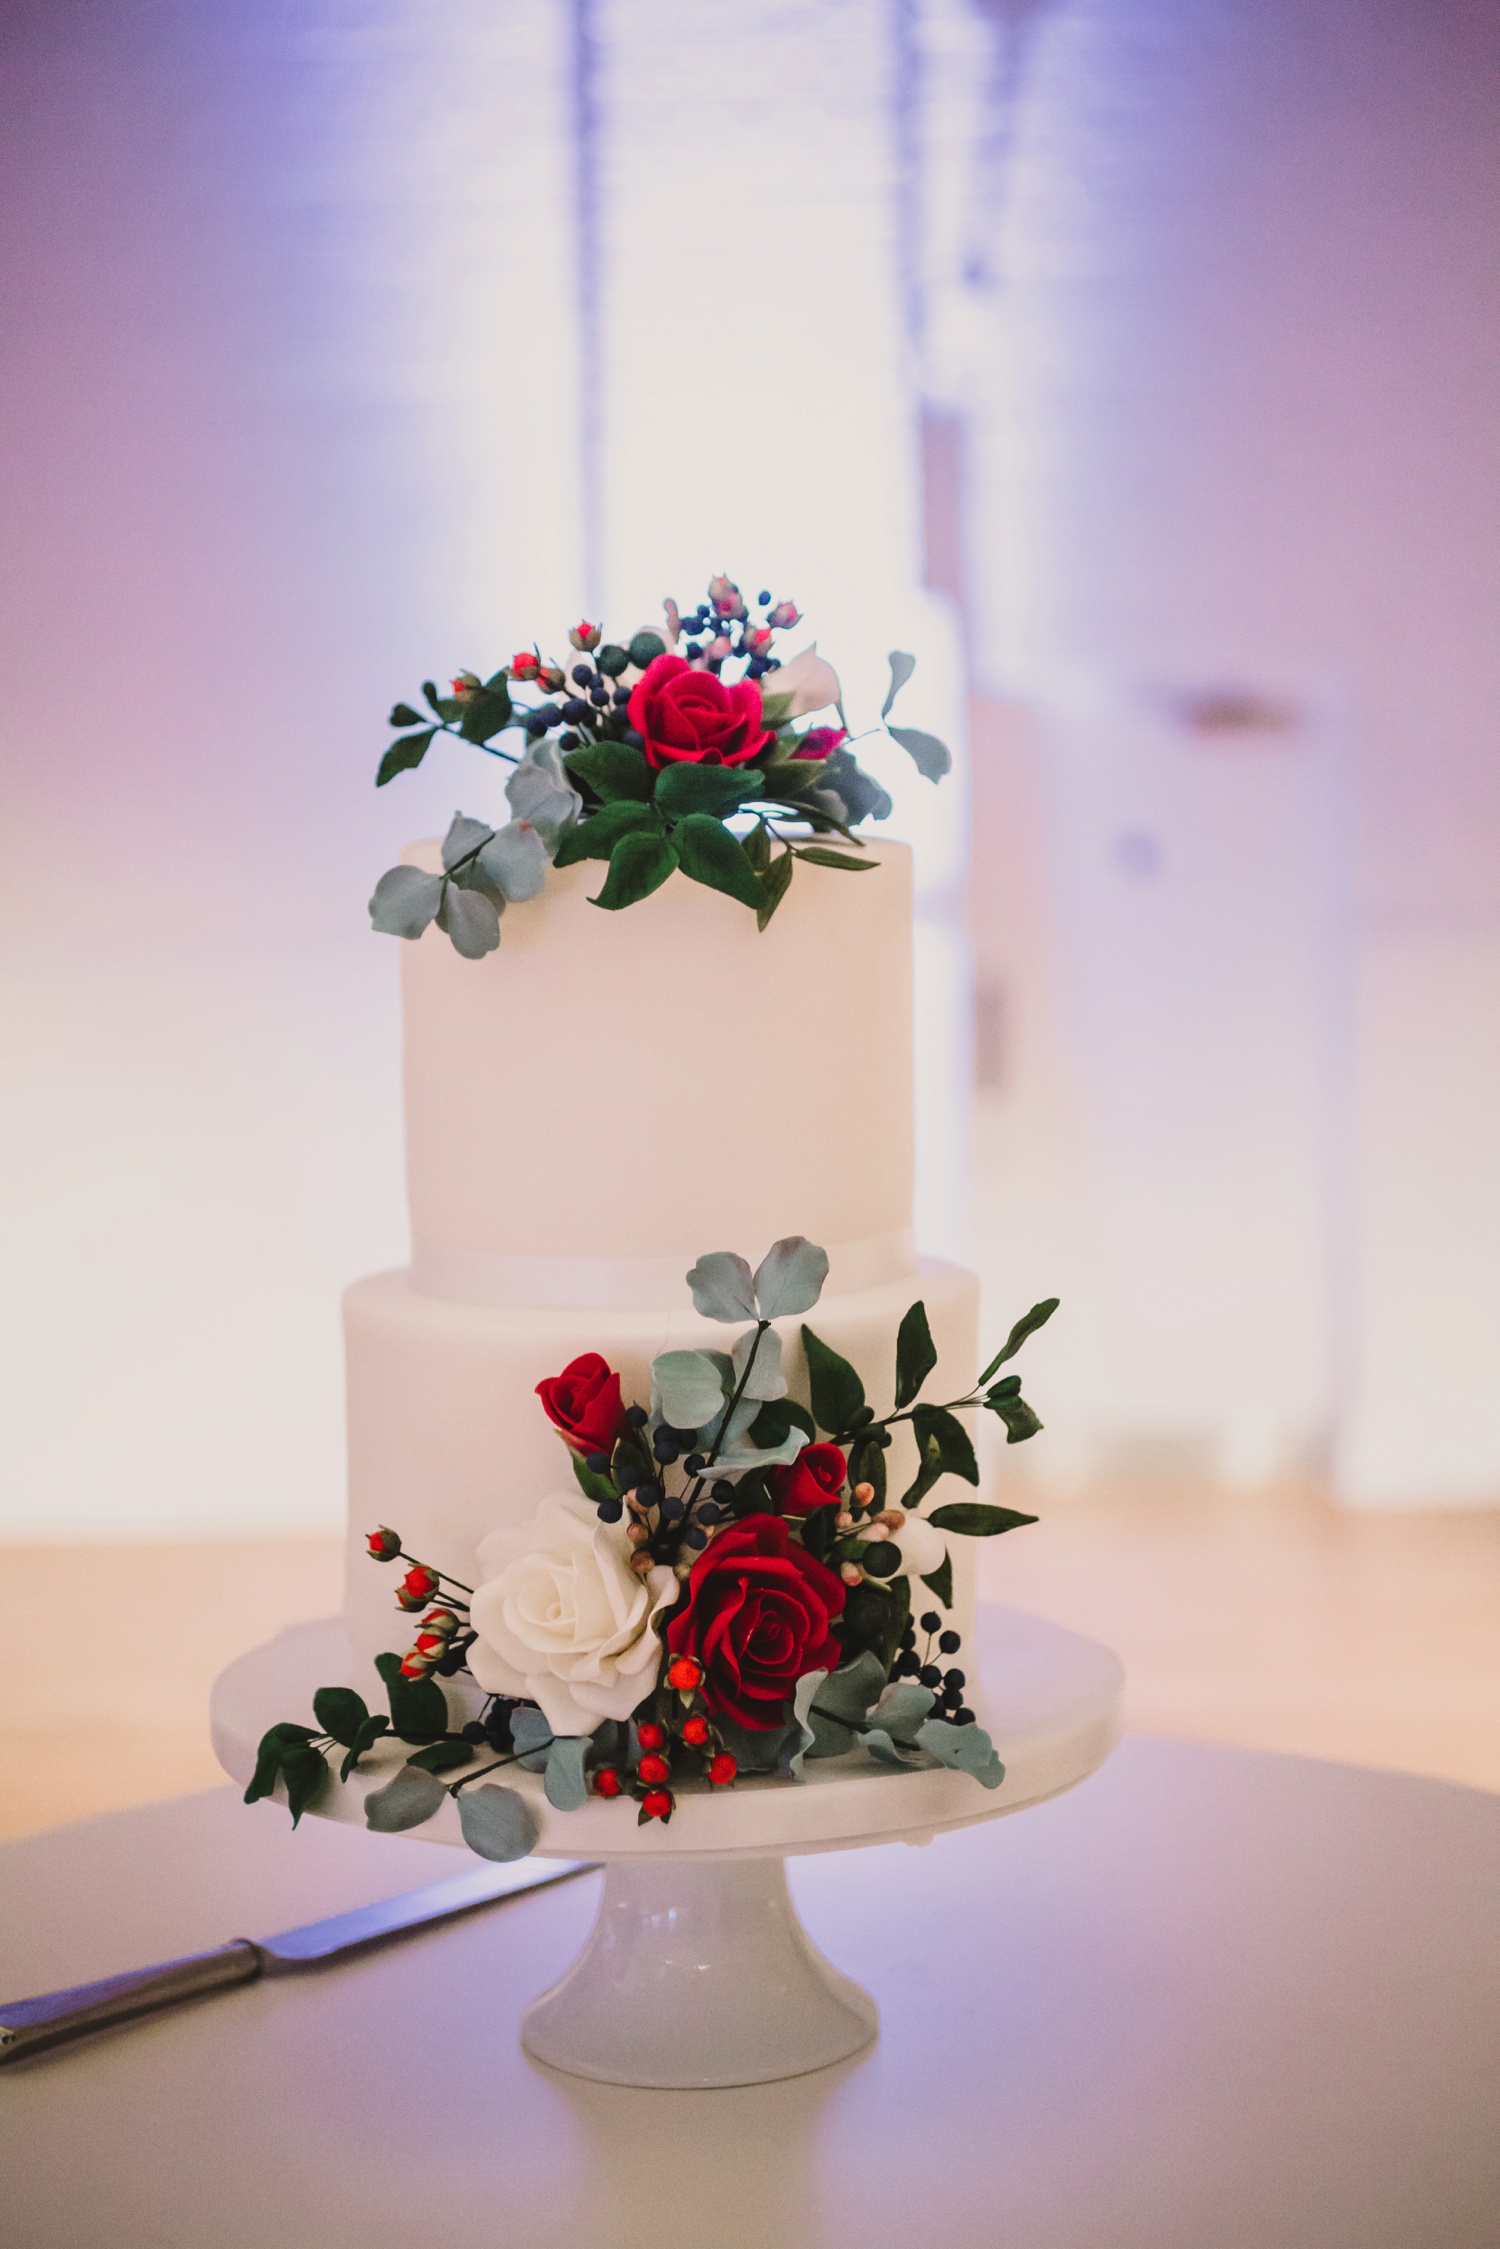 Wedding cake with red and white flowers holkham hall